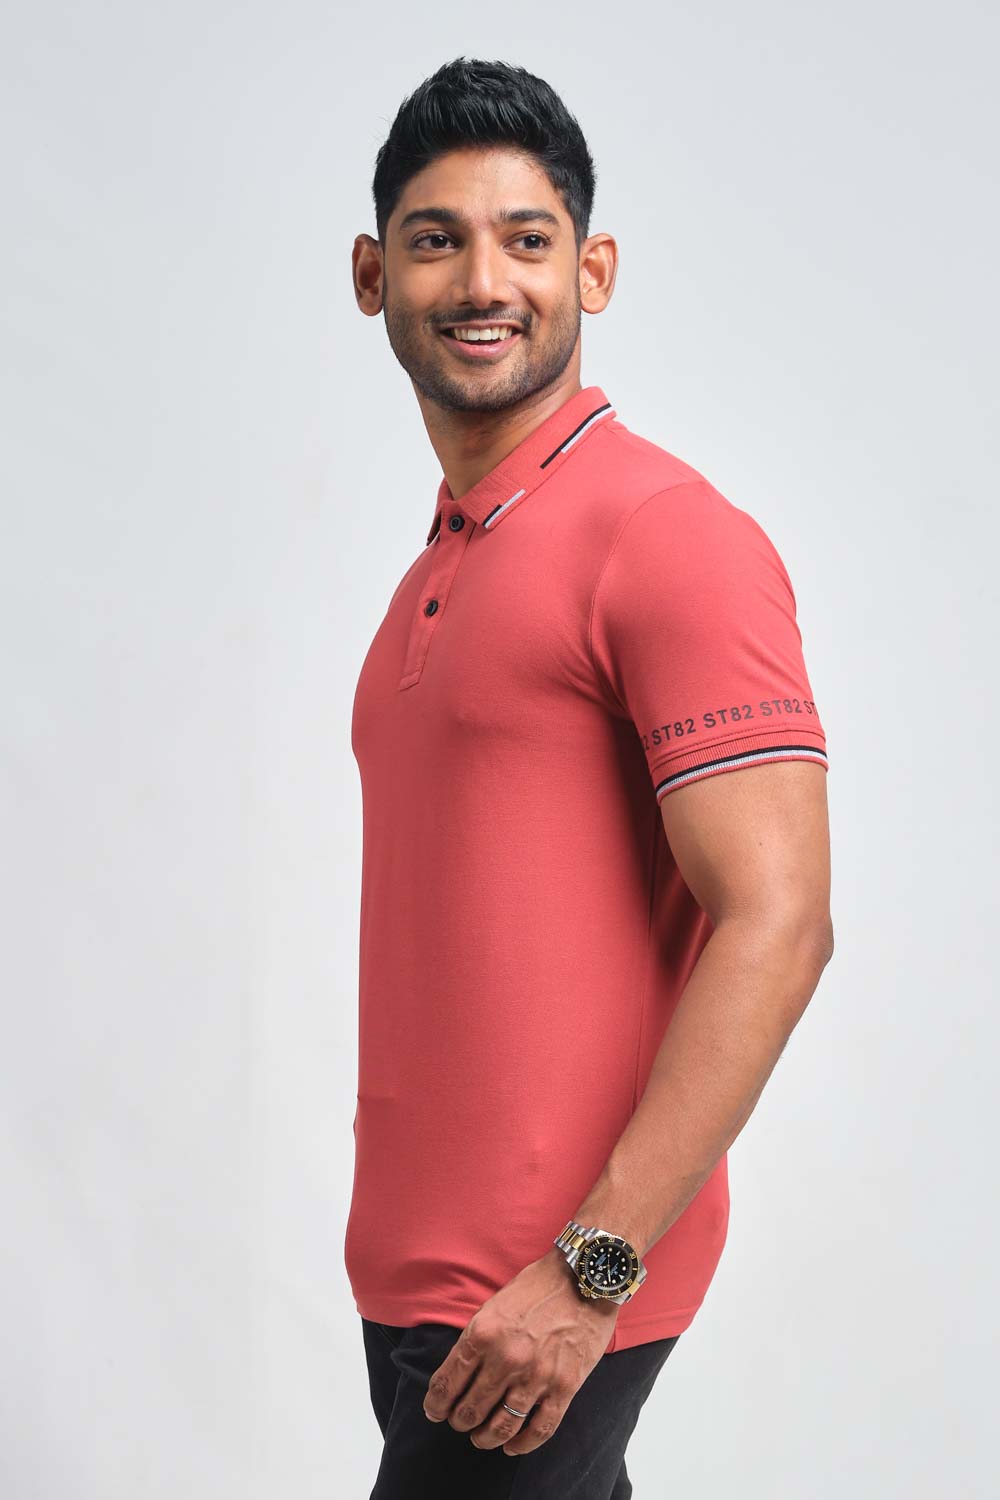 Plain premium cotton with S82 printed around the cuff, Slim fit polo T-shirt